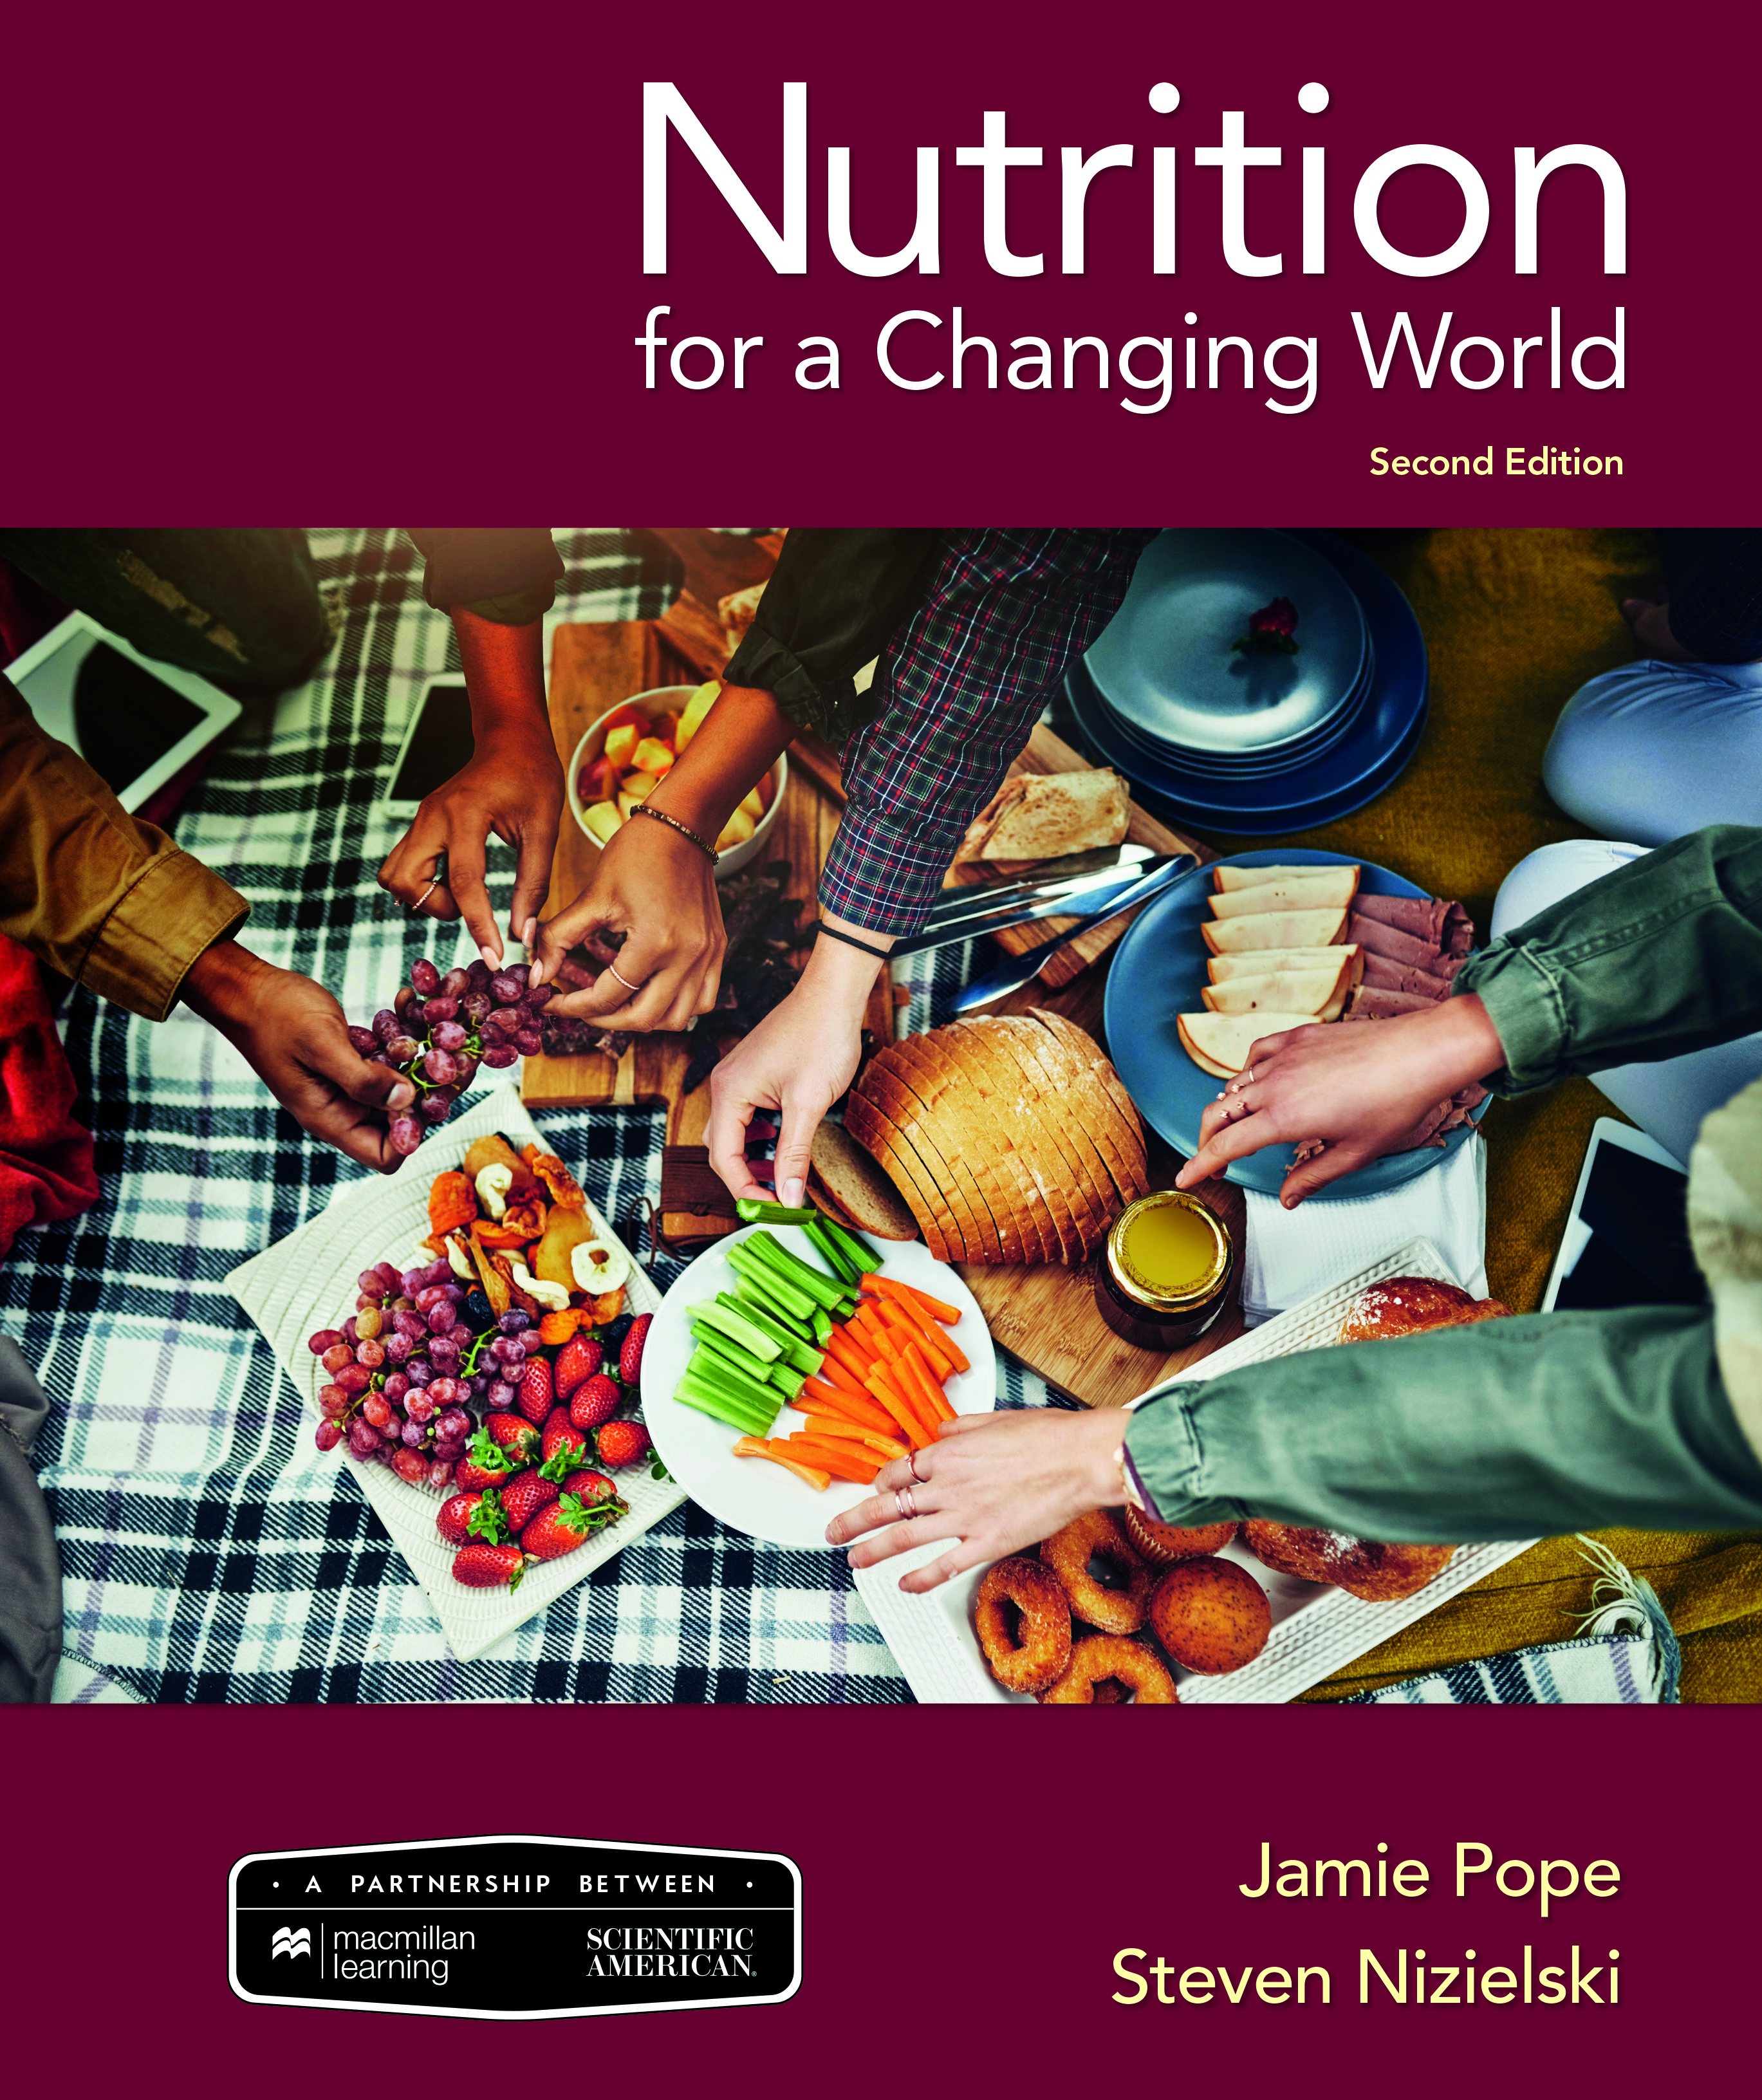 Nutrition for a Changing World